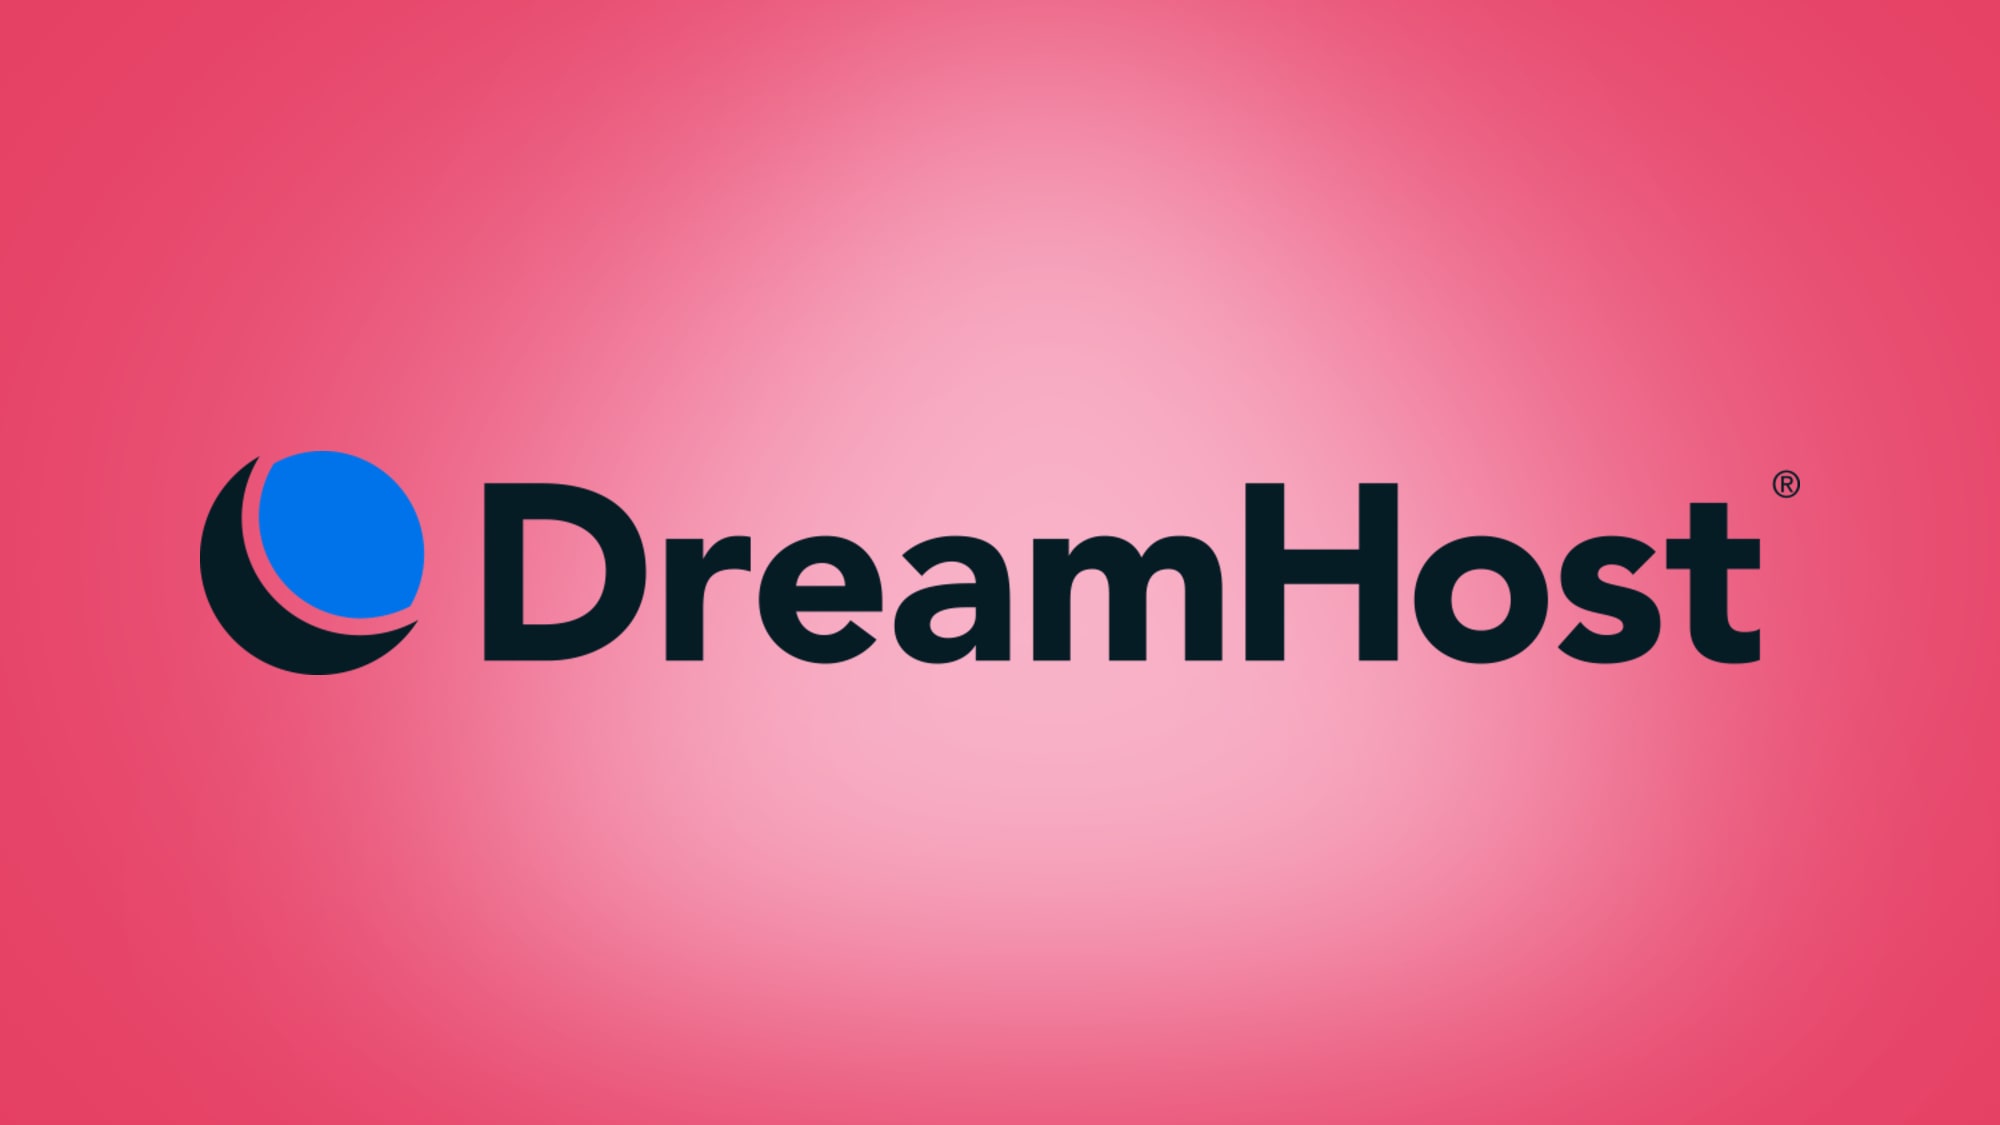 DreamHost logo in black on pink background